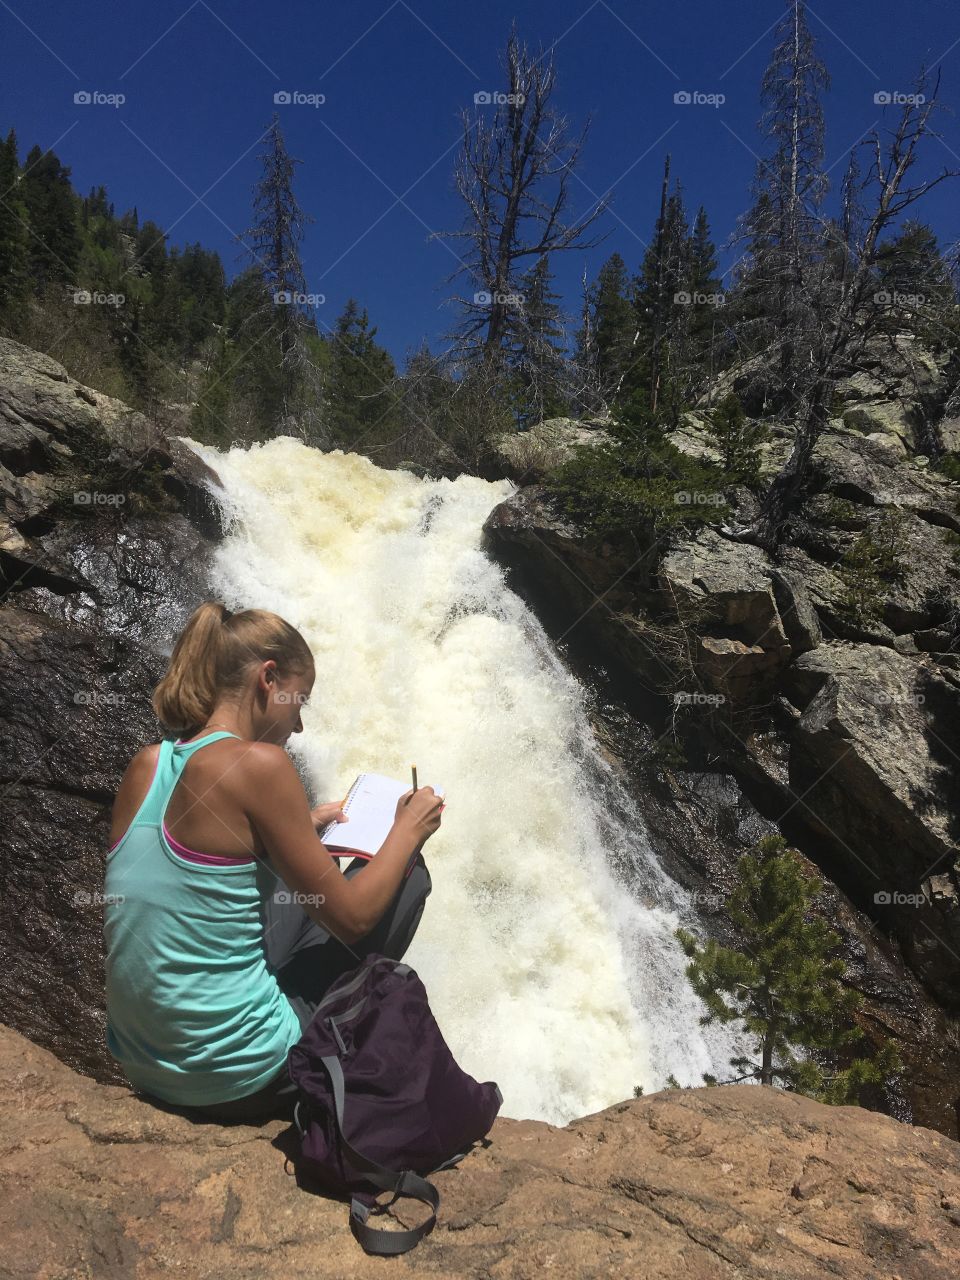 Someone kindly sent me picture after unknowingly snapping it, so happy they did. Upper Fish Creek Falls, steamboat Springs, CO